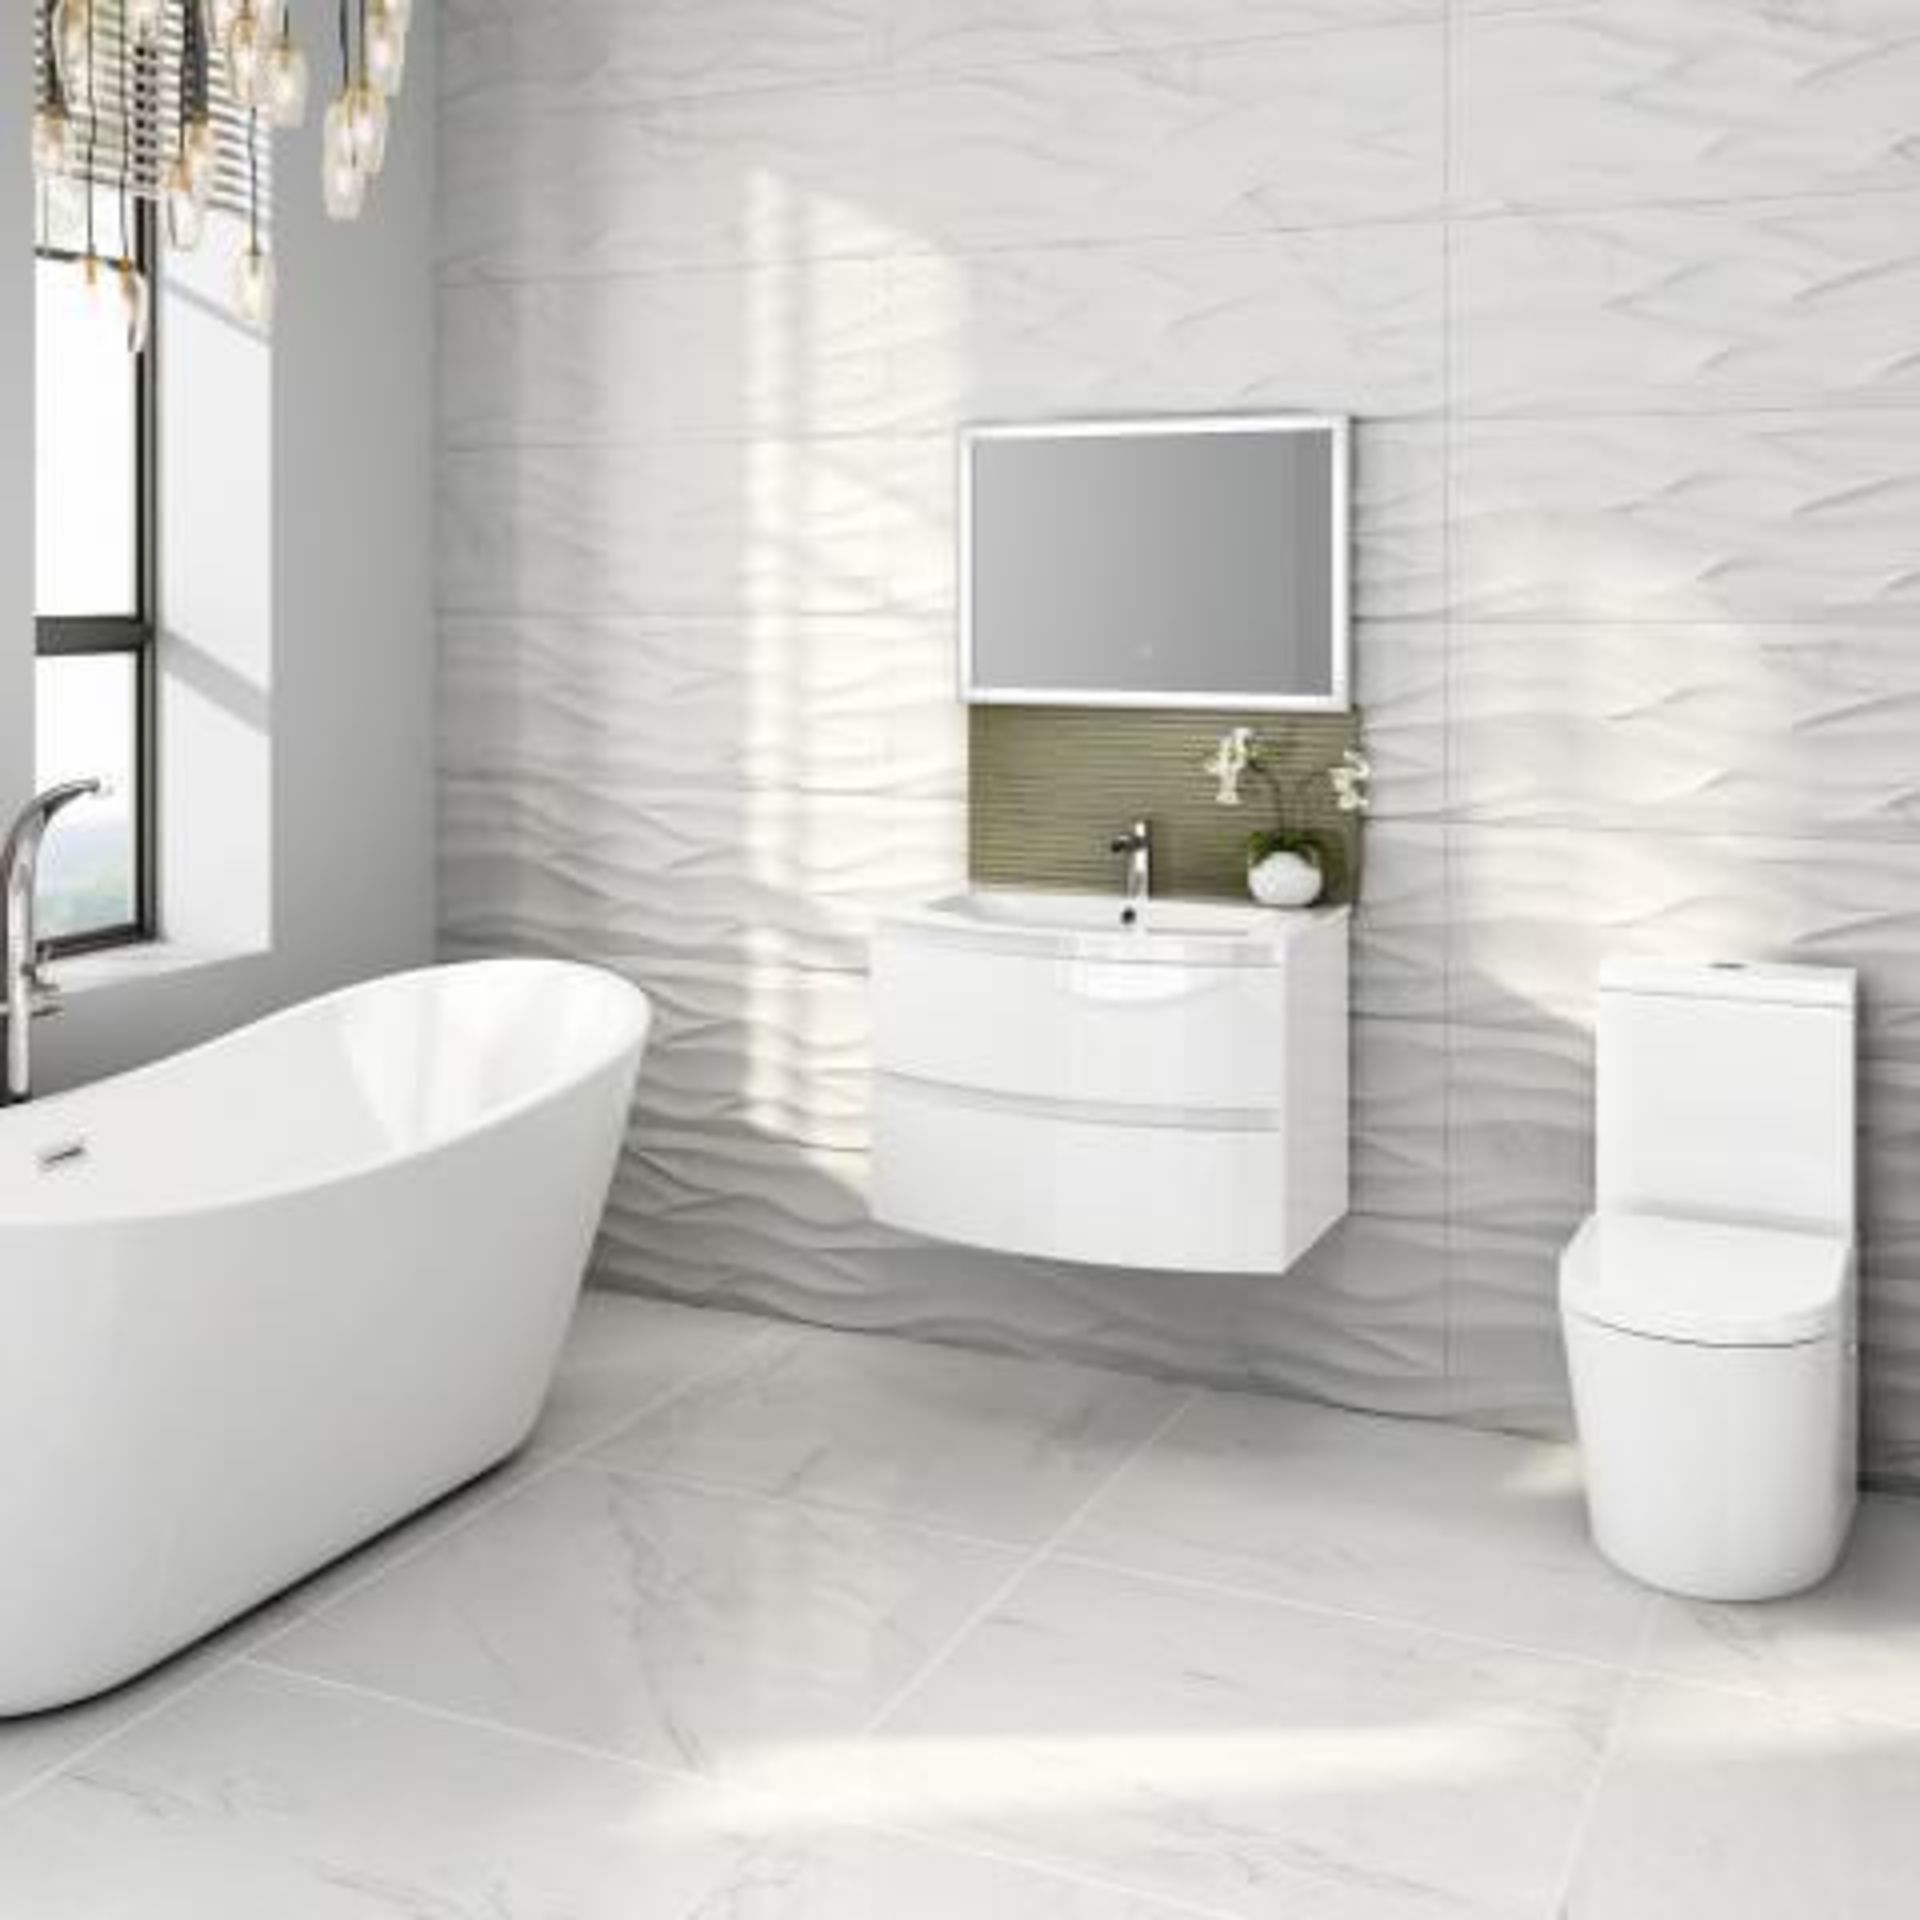 Pallet To Contain 5 x 700mm Amelie High Gloss White Curved Vanity Unit - Wall Hung. RRP £649.99 - Image 3 of 5